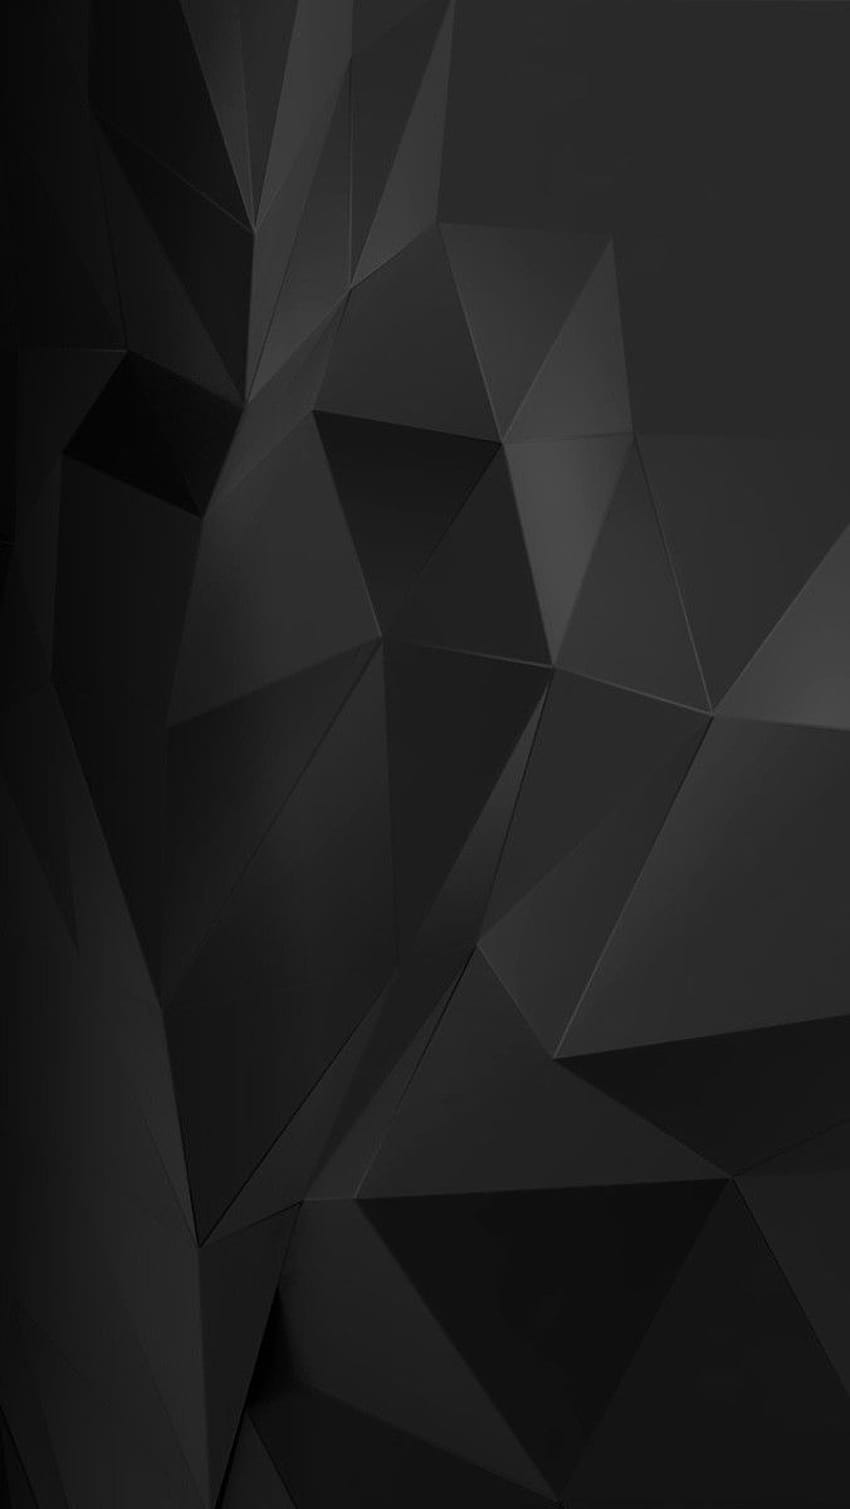 Problem with stock black wallpaper - Ipho… - Apple Community